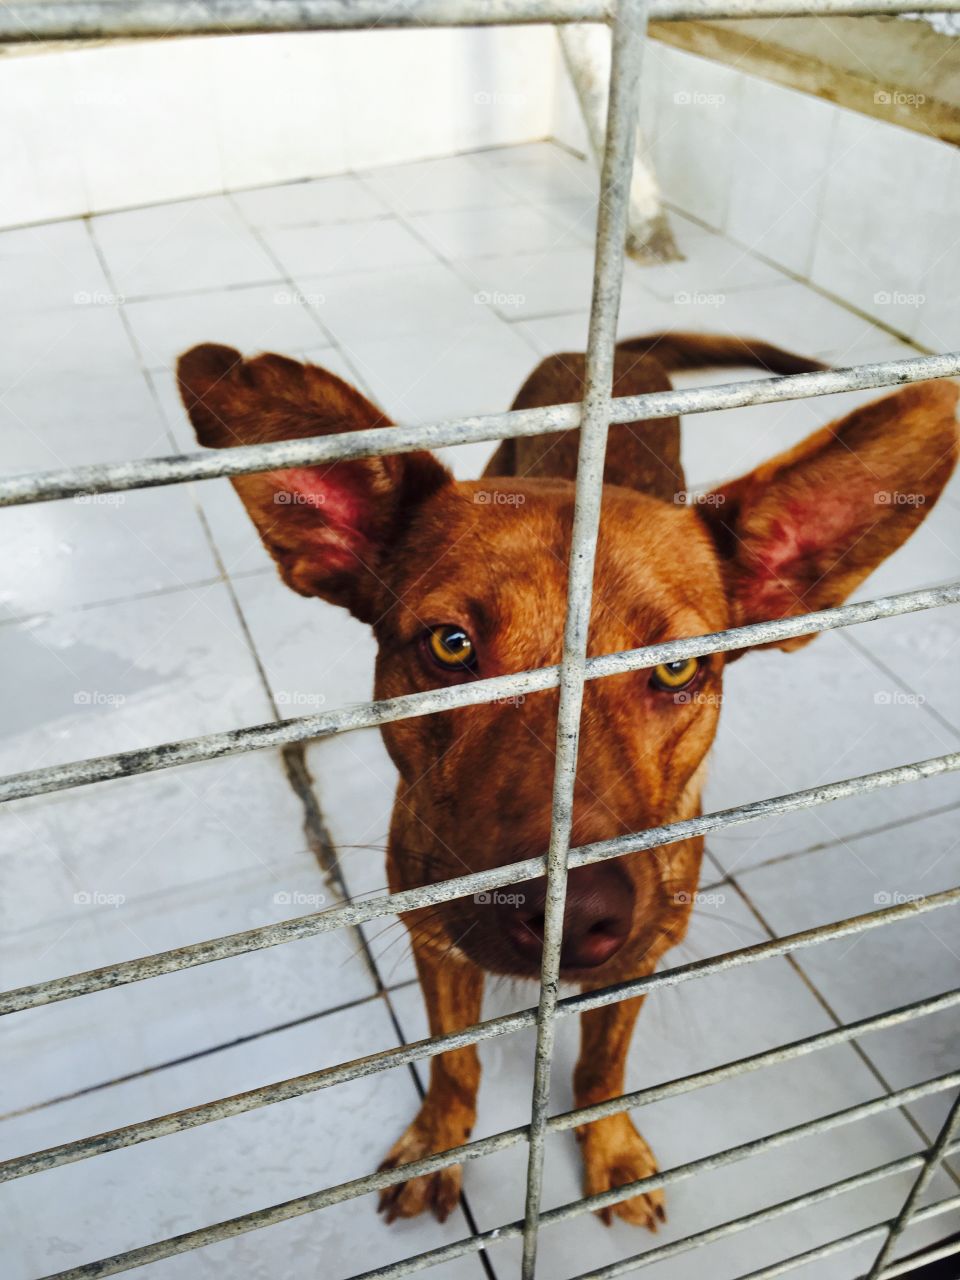 A portrait of a spanish podengo dog that’s up for adoption standing in his cage. He’s brown with large ears and is looking right at the camera 